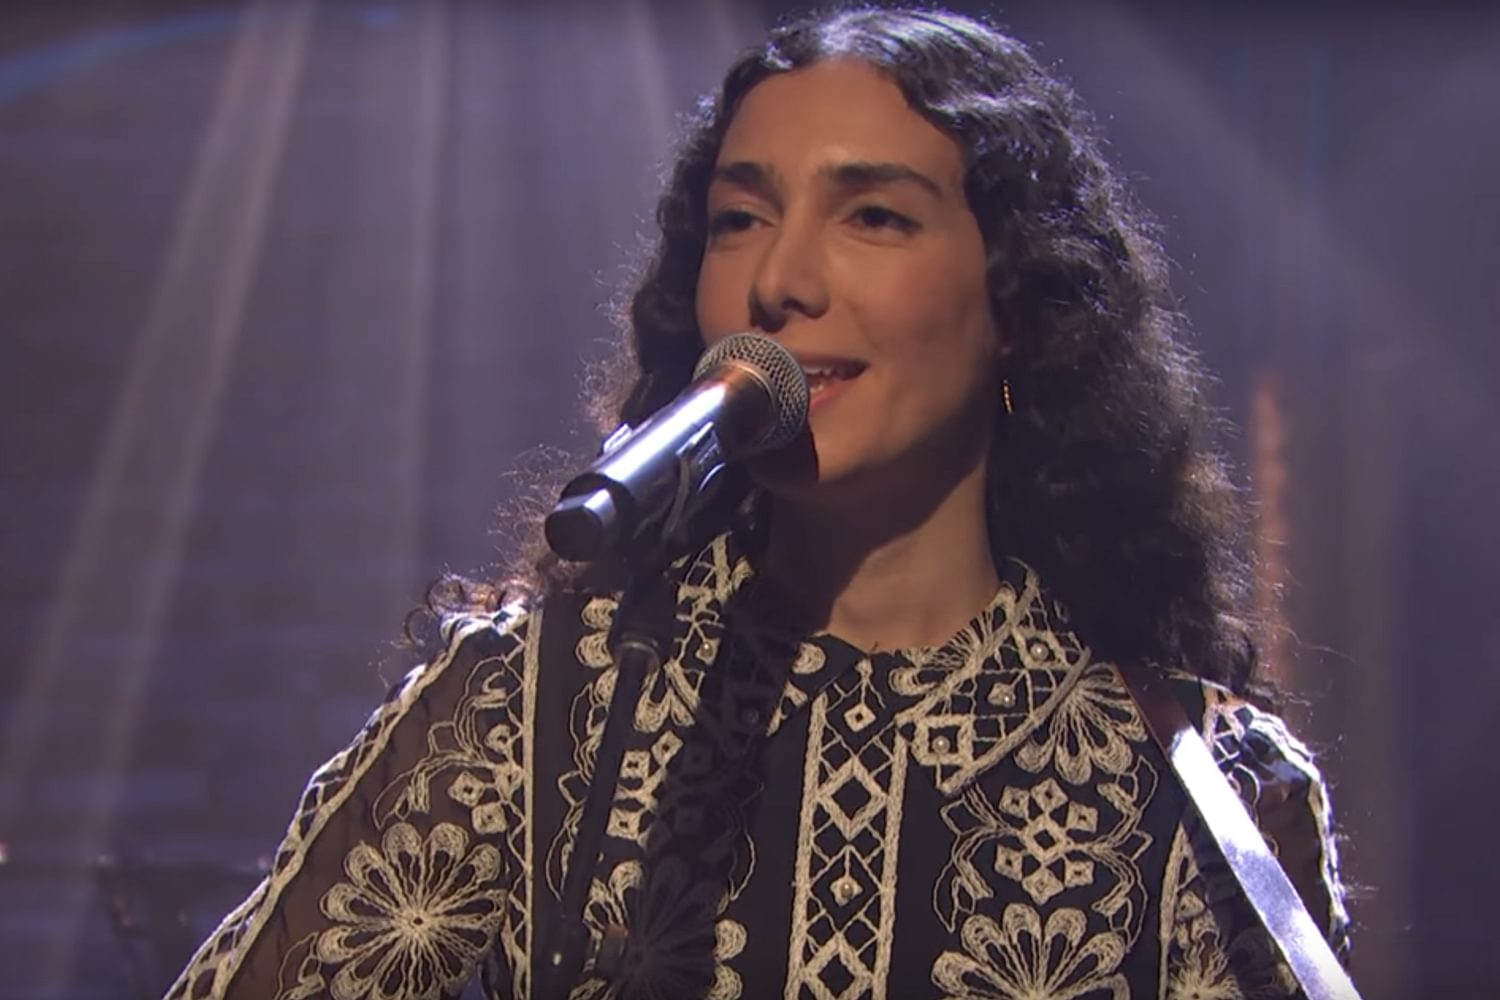 Watch Bedouine play ‘One Of These Days’ on Seth Meyers